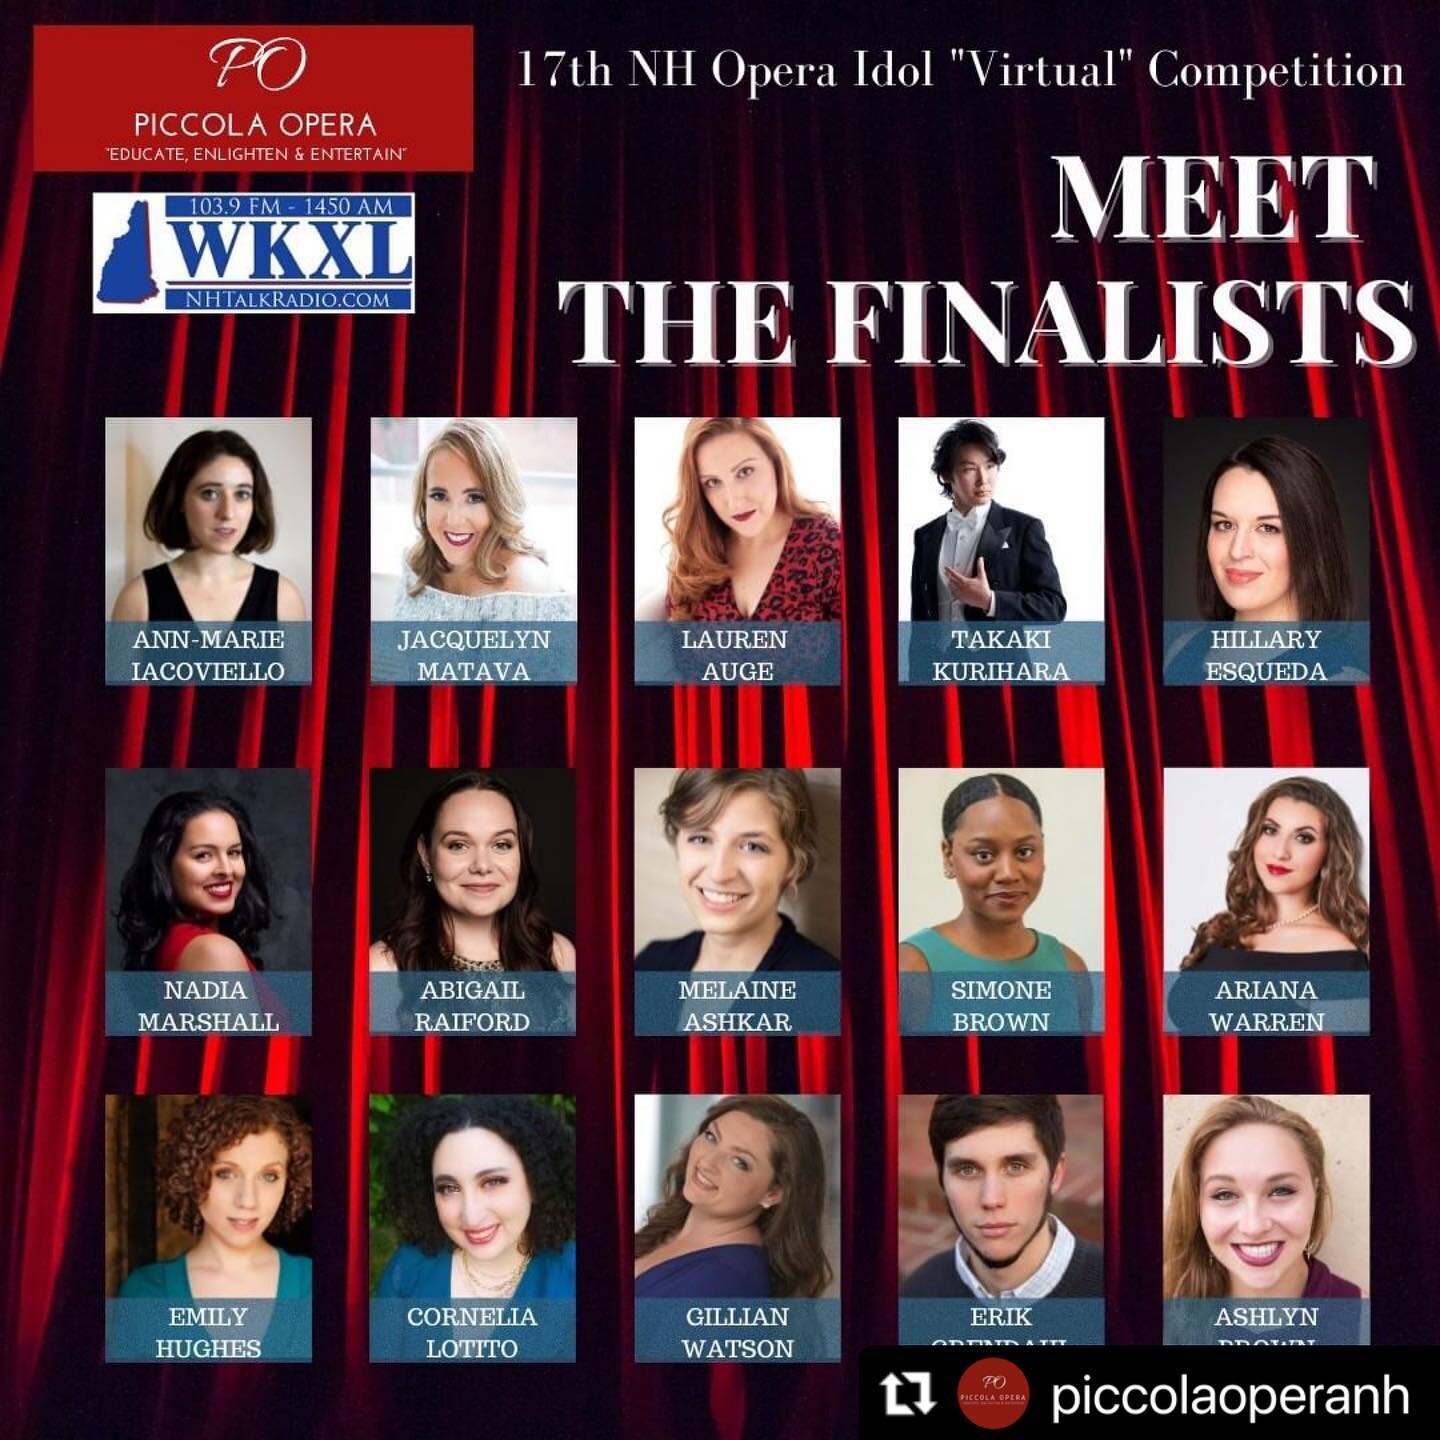 ✨ TOMORROW ✨ So excited to be competing virtually alongside these other artists! Hope to 👀 you there!
🎶
🎶 
@piccolaoperanh